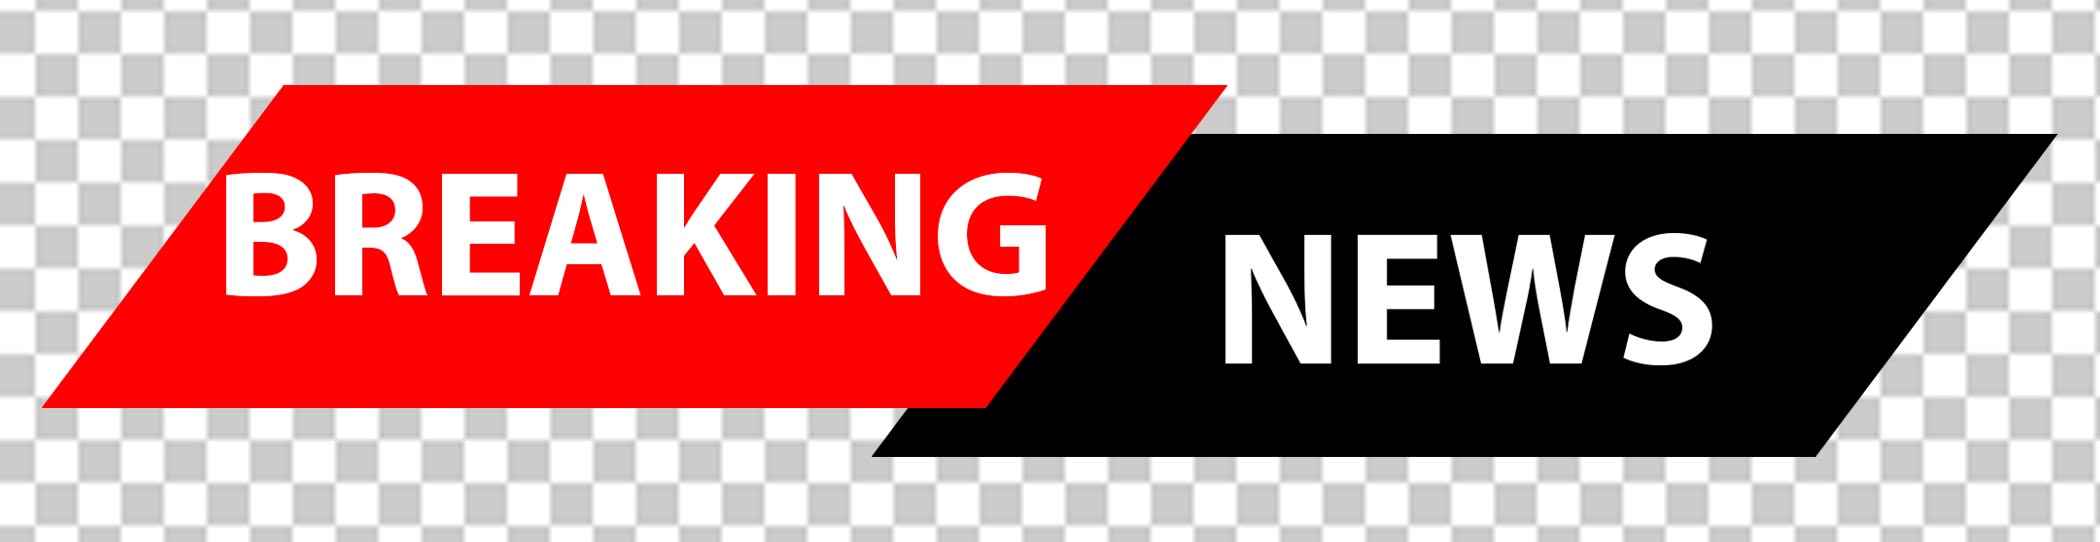 Breaking News Png Template Free High Quility Image Download | The Mayanagari